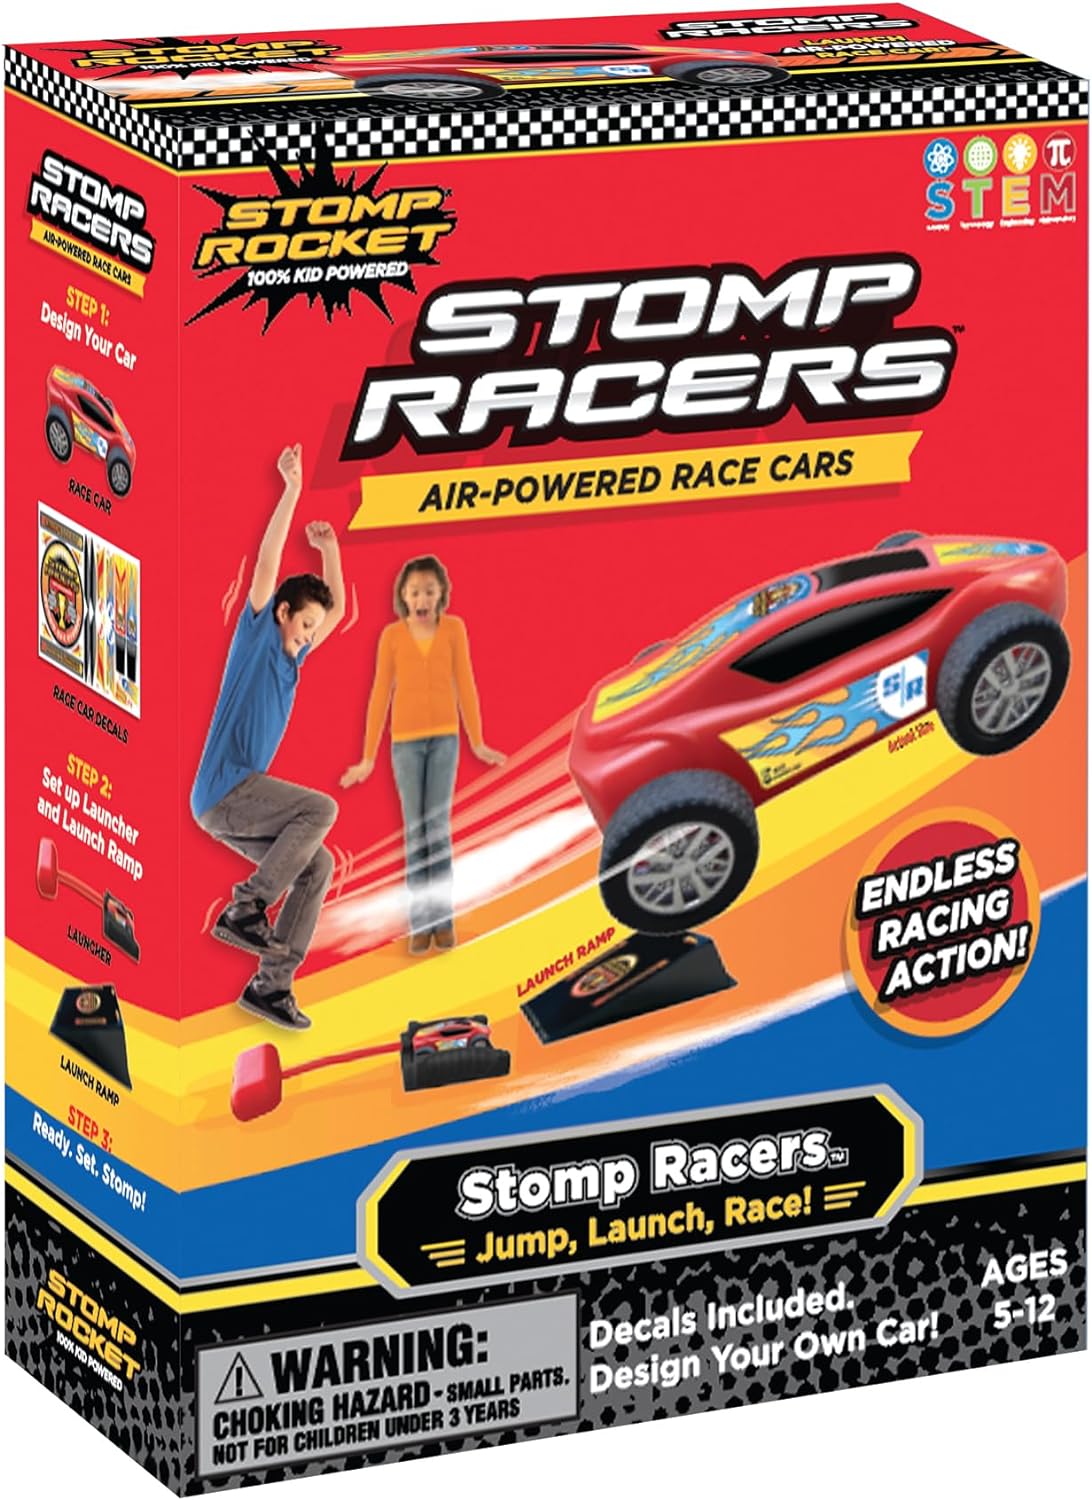 Stomp Racers Air Powered Race Cars by Stomp Rocket, Single Racer Pack - Dueling Stomp Racers Toy Car Launcher - Fun Backyard & Outdoor Multi-Player Kids Toys Gifts for Boys, Girls & Toddlers - image 1 of 7